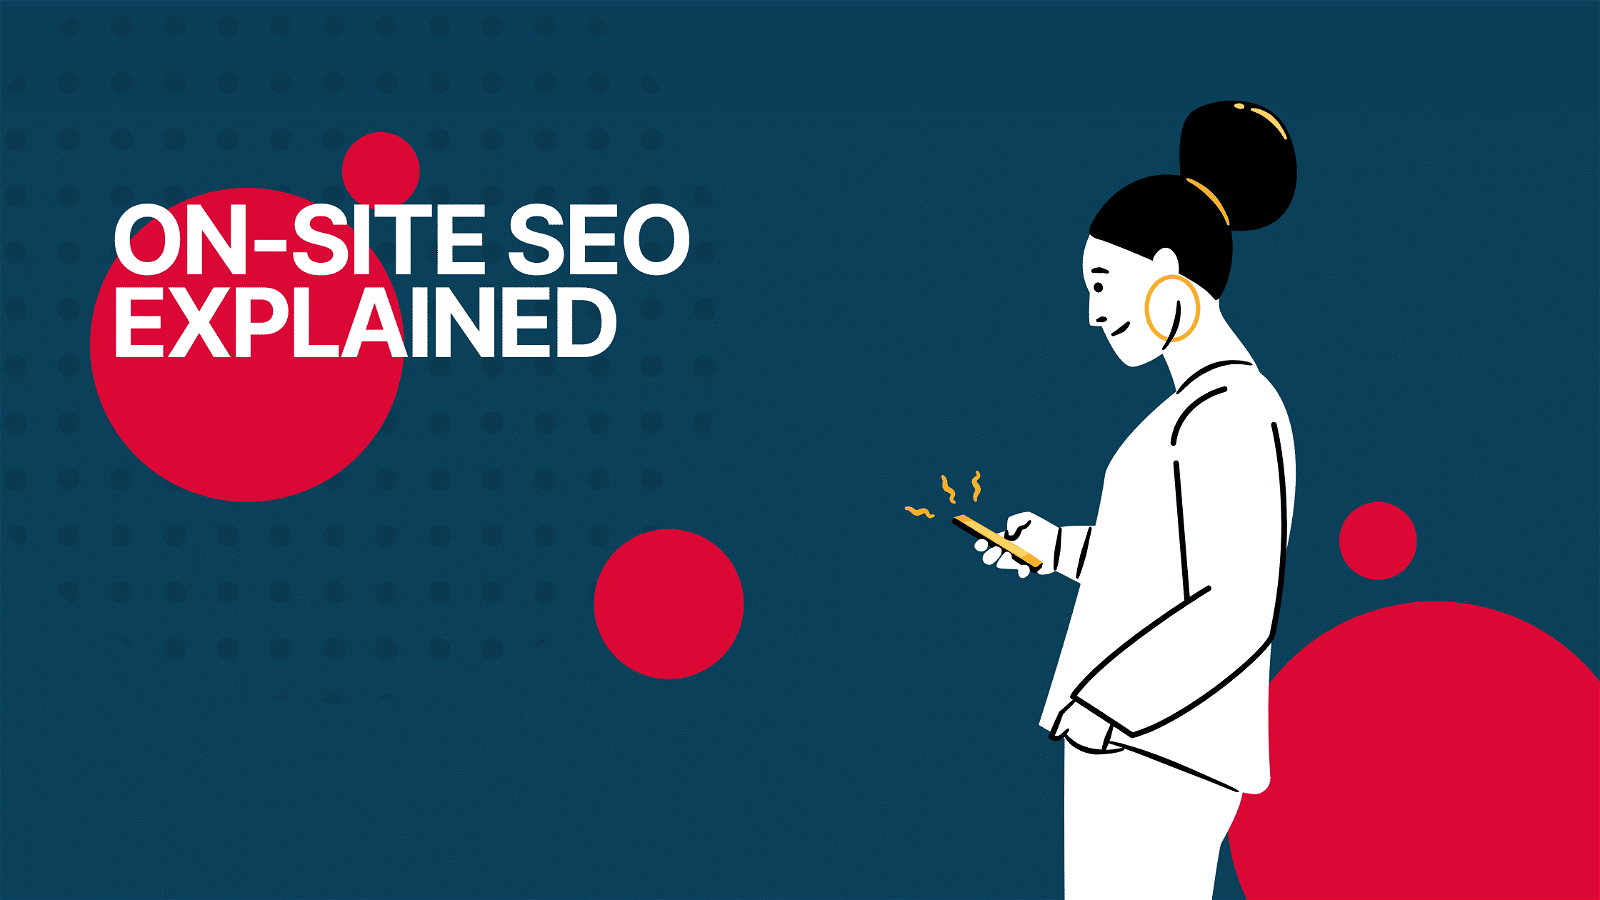 This image is explaining the concept of on-site SEO, which is the process of optimizing a website's content and structure to improve its visibility in search engine results.